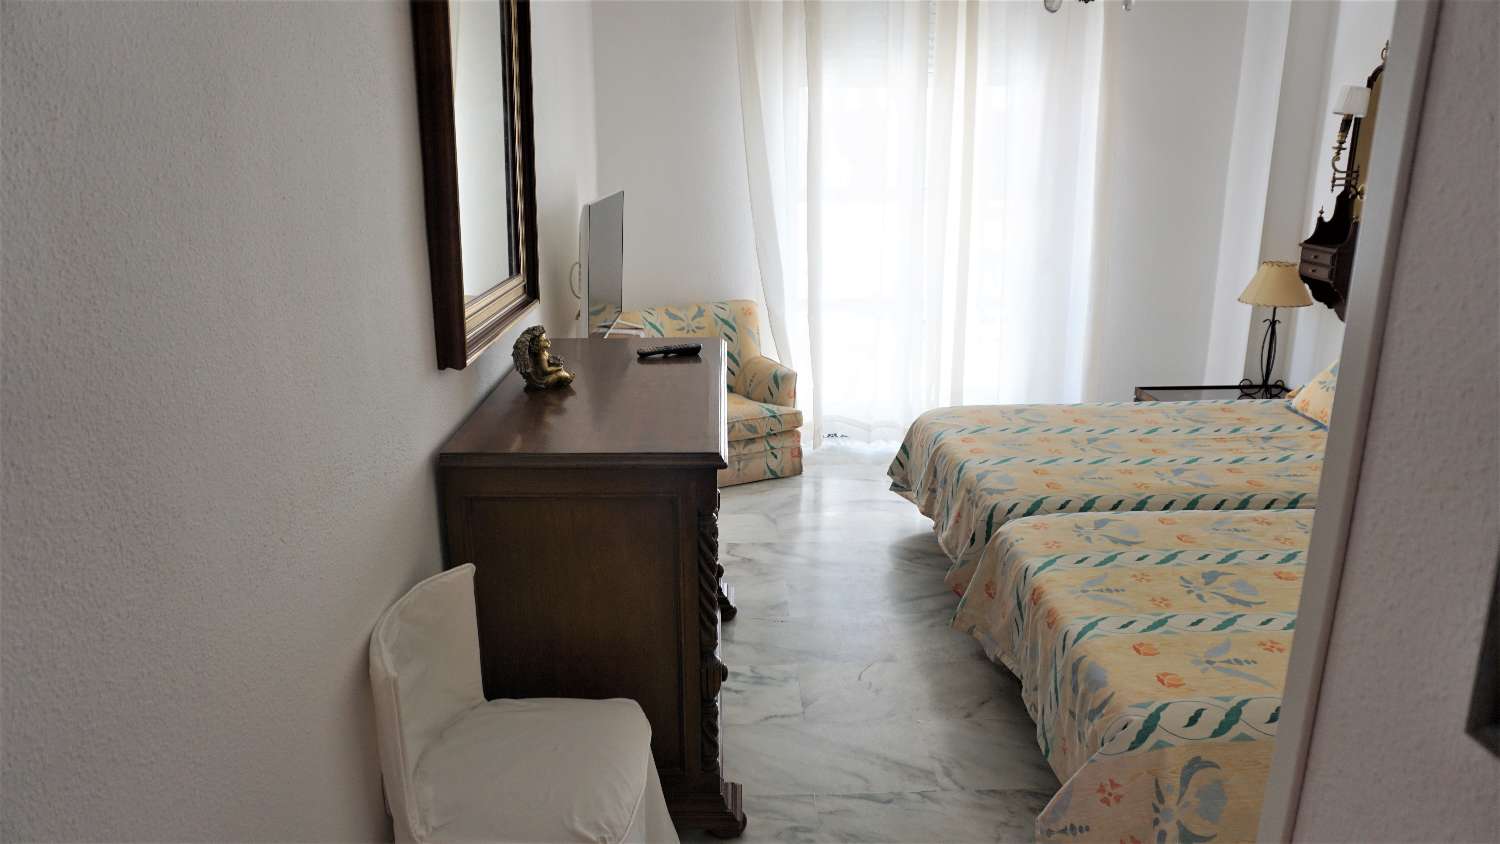 Unbeatable apartment on the beach, 3 bedrooms, super equipped, pool, wi-fi, Fuengirola